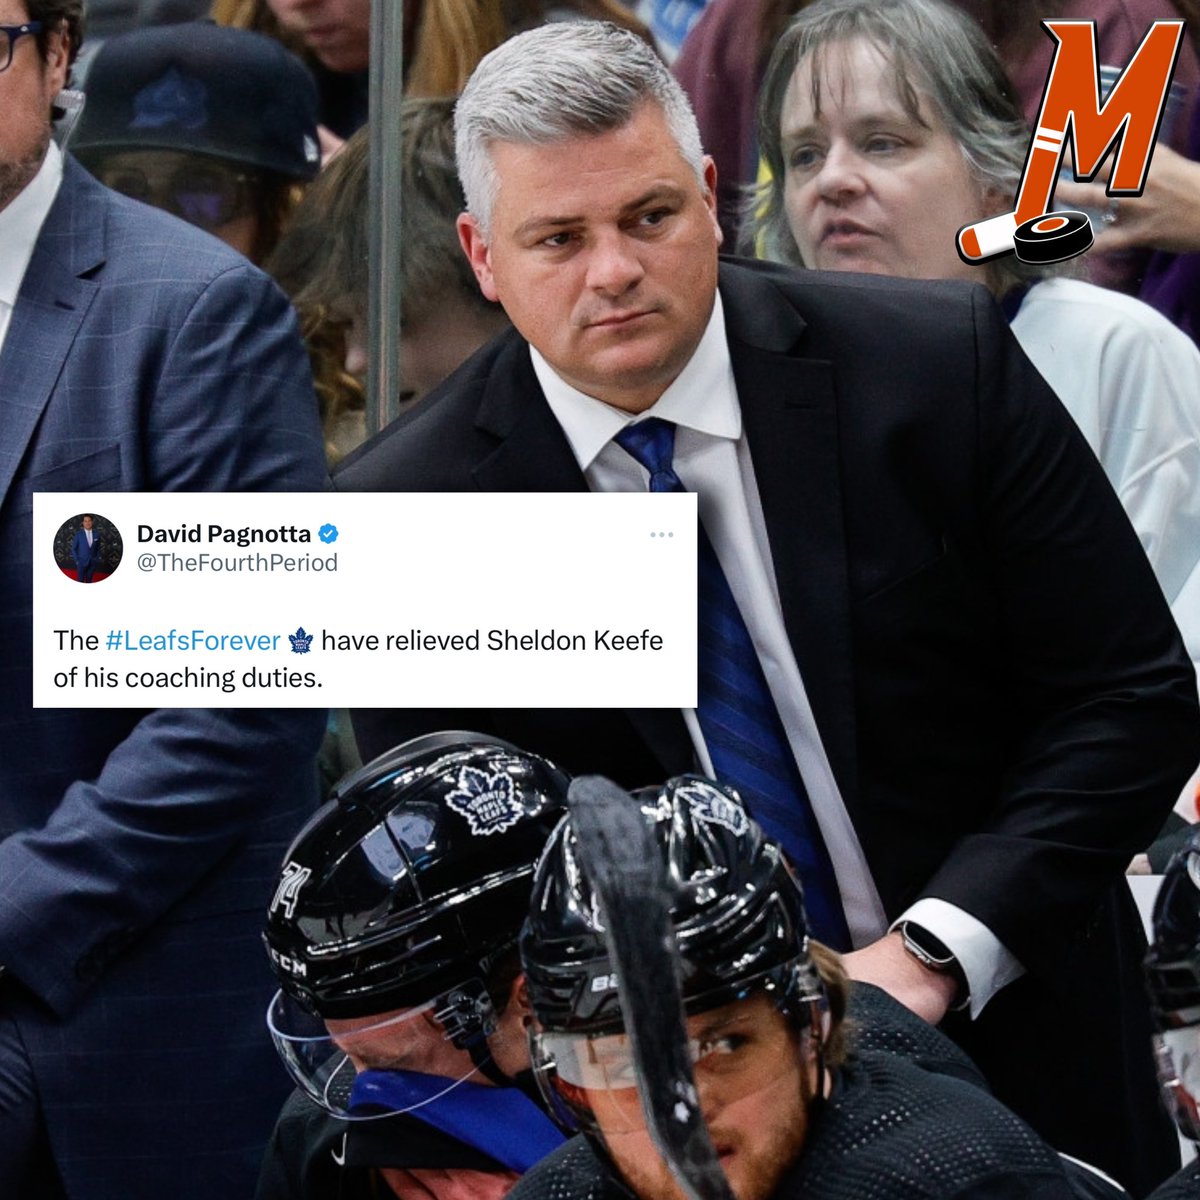 The #LeafsForever are making some changes 👀 Sheldon Keefe has been let go and they’ll have a new bench boss #NHL | #ShowYourFlyer